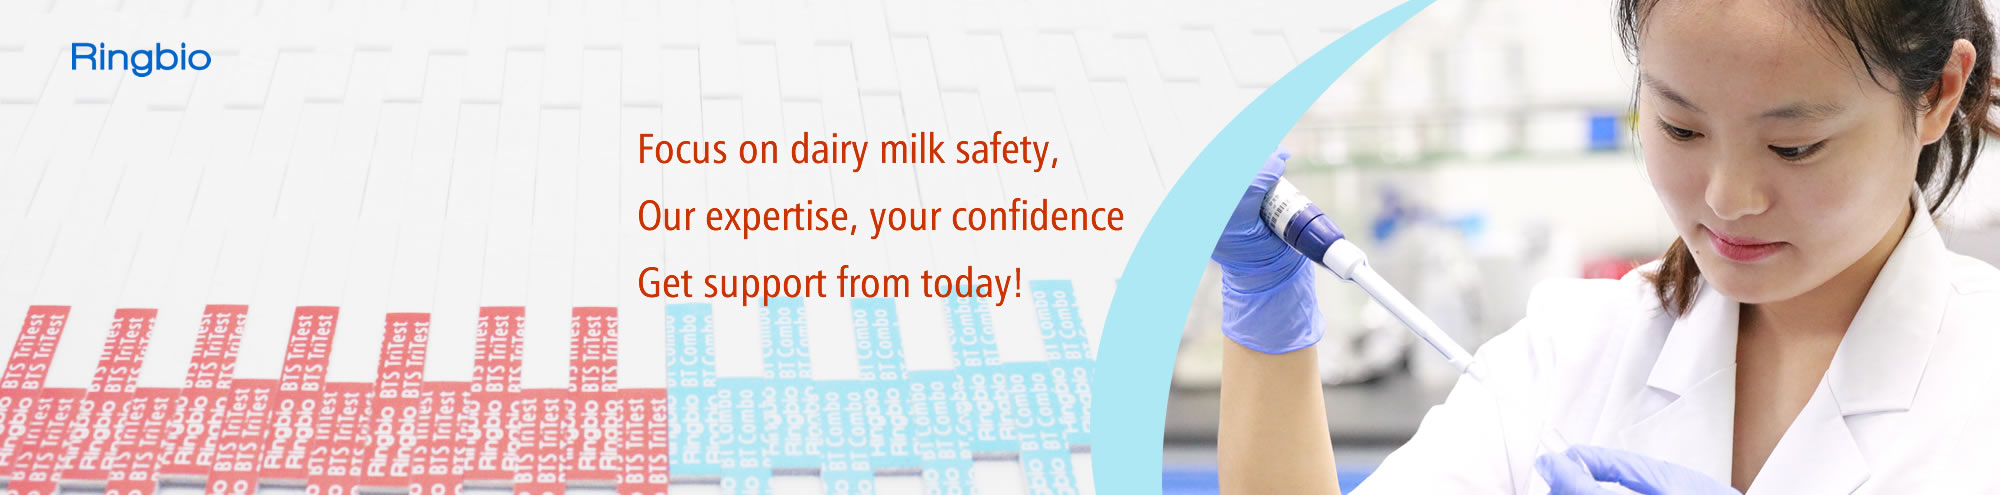 Ringbio's expertise to help you enhance your dairy milk safety